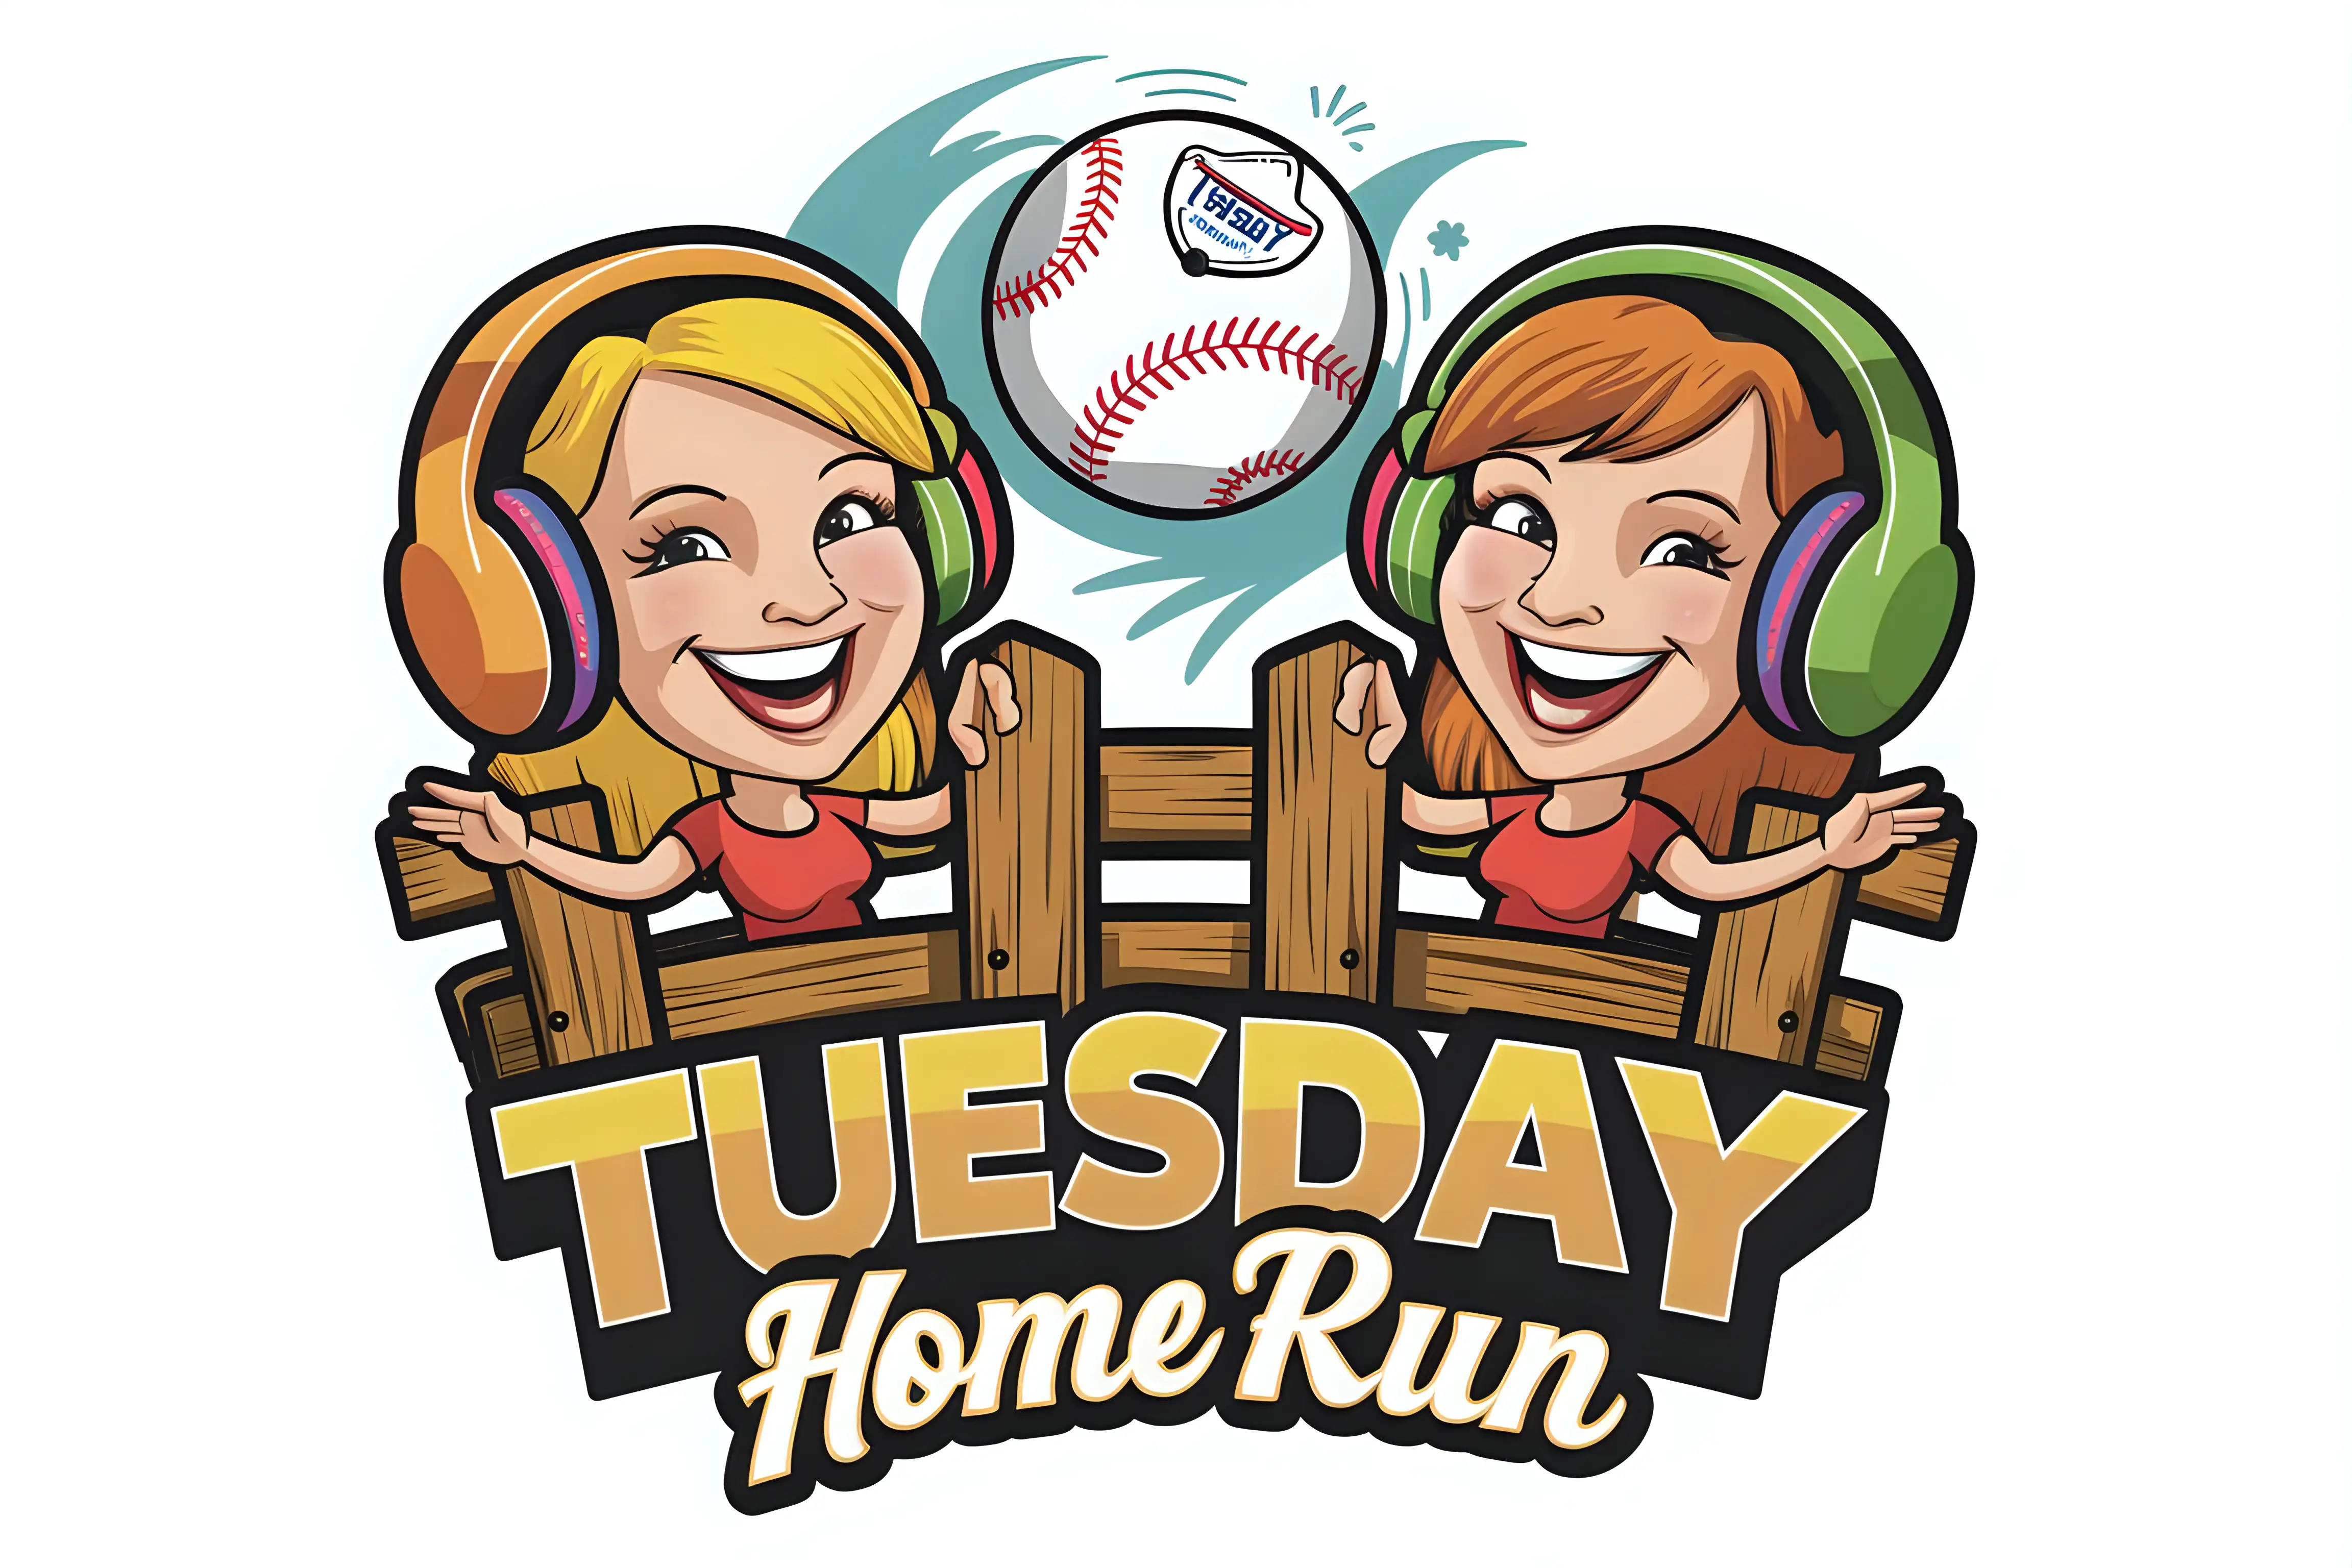 Buisness logo "Tuesday home run with Laura and Stevie" 2 animated ladies standing on the sides of a sturdy wooden fence smiling wearing headphones 


